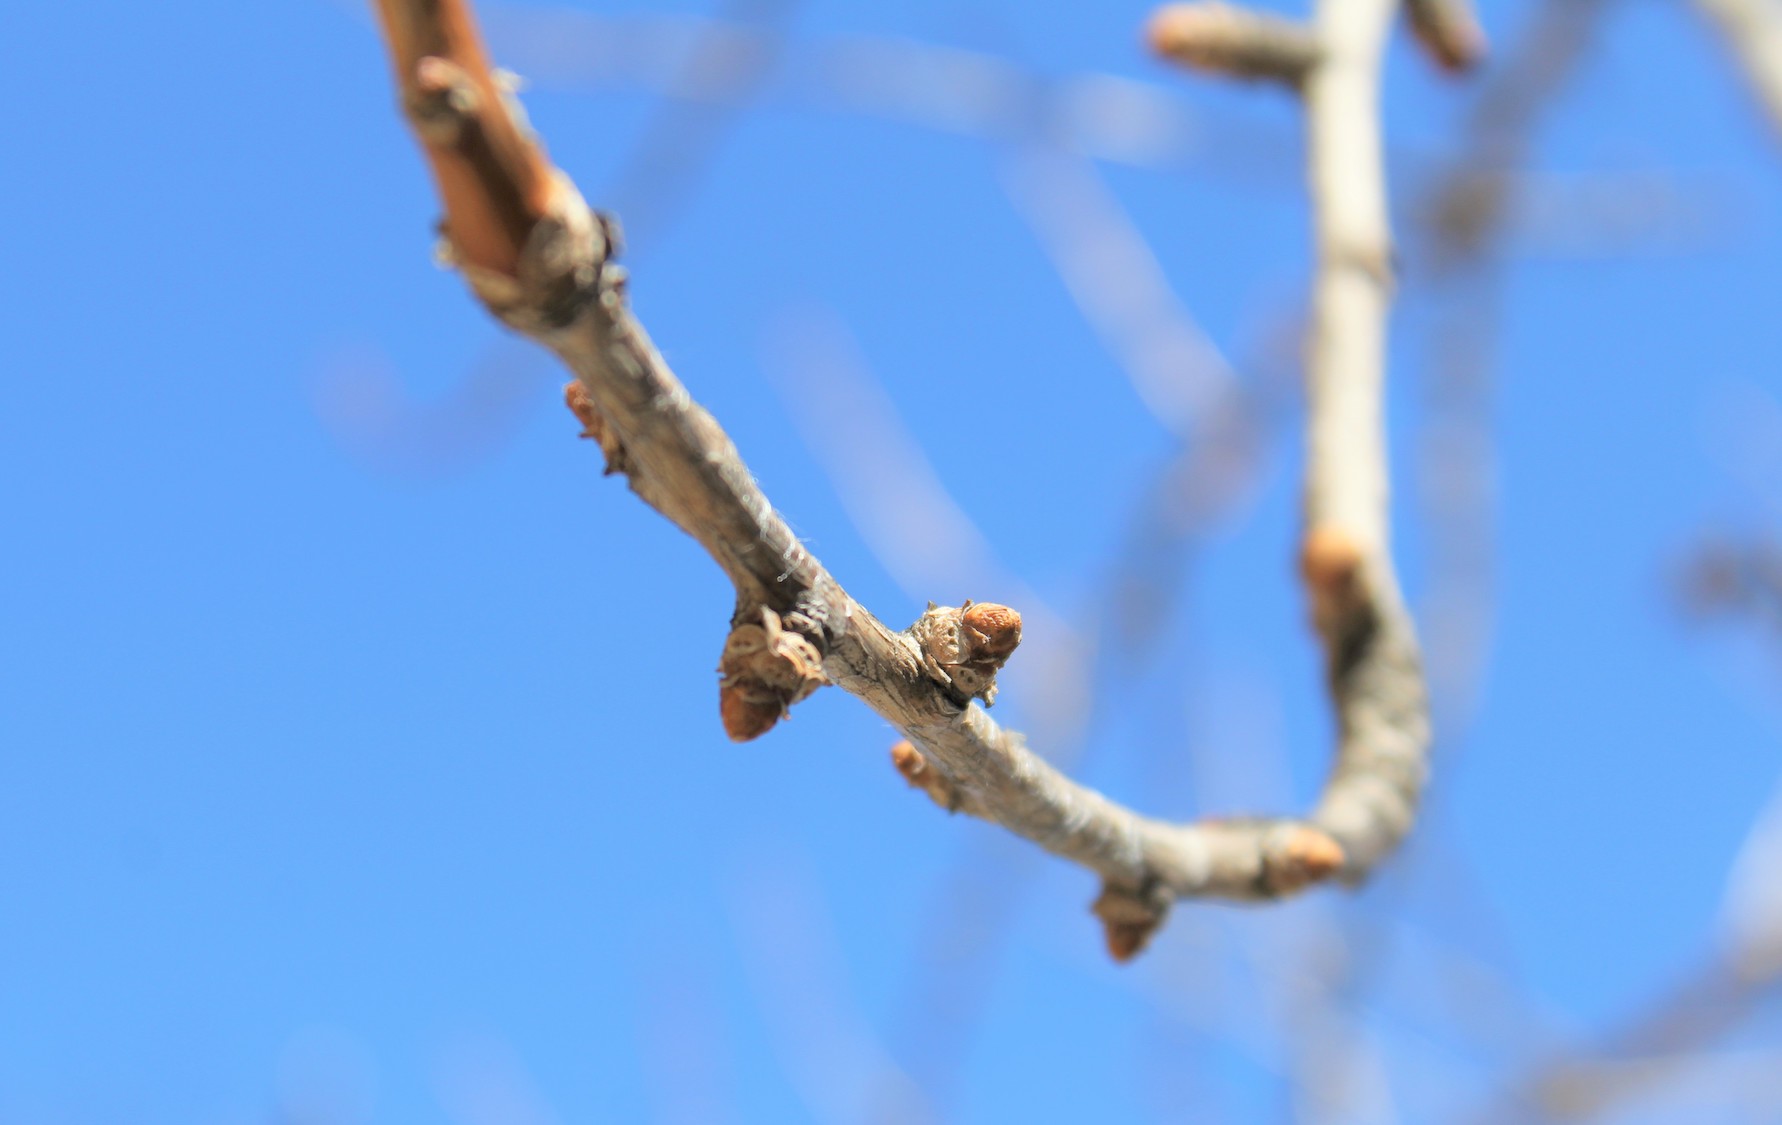 How to tell fruit buds from leaf buds – Grow Great Fruit